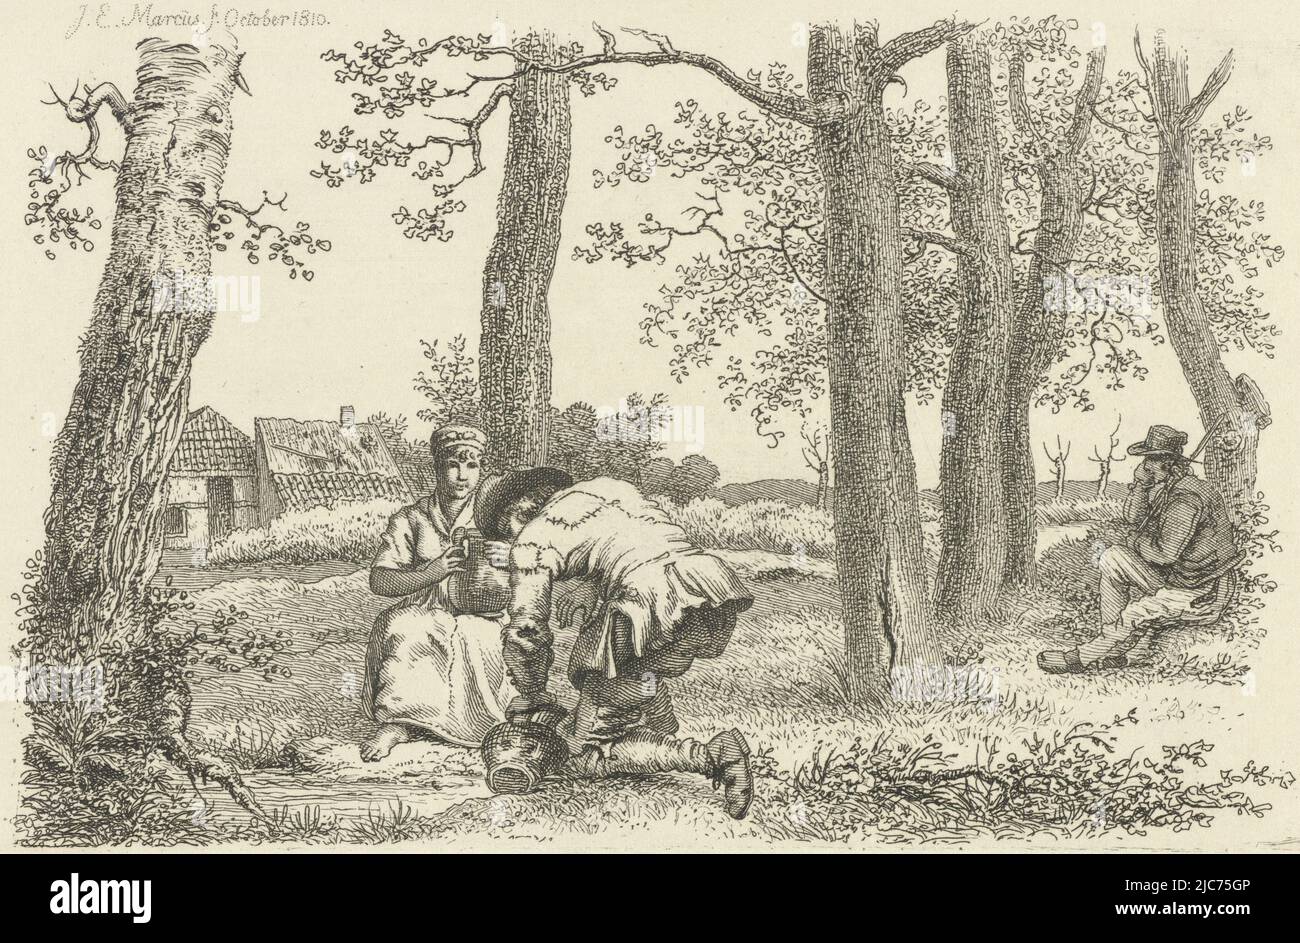 A kneeling man scooping water from a stream with a jug, a seated woman with a jug on her lap and a seated man with a stick among trees, Figures among trees Study printwork, Etudes grav, print maker: Jacob Ernst Marcus, (mentioned on object), Amsterdam, Oct-1810, paper, etching, h 119 mm × w 197 mm Stock Photo